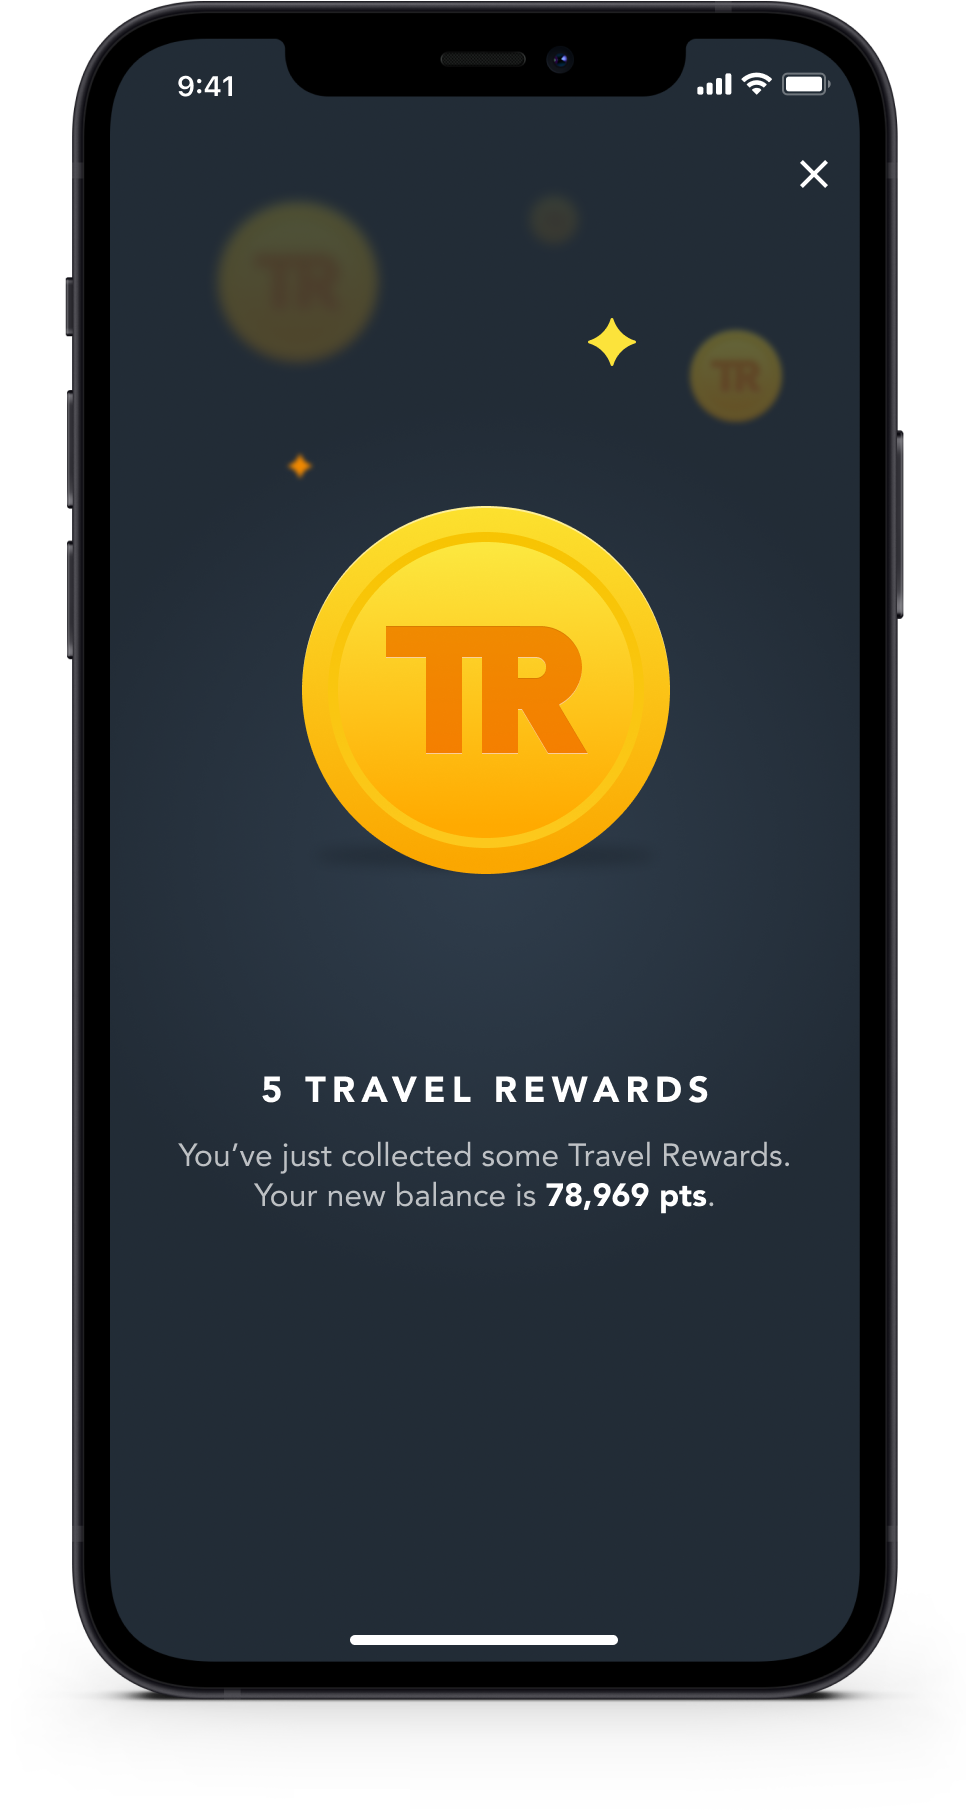 Travel rewards app points collected